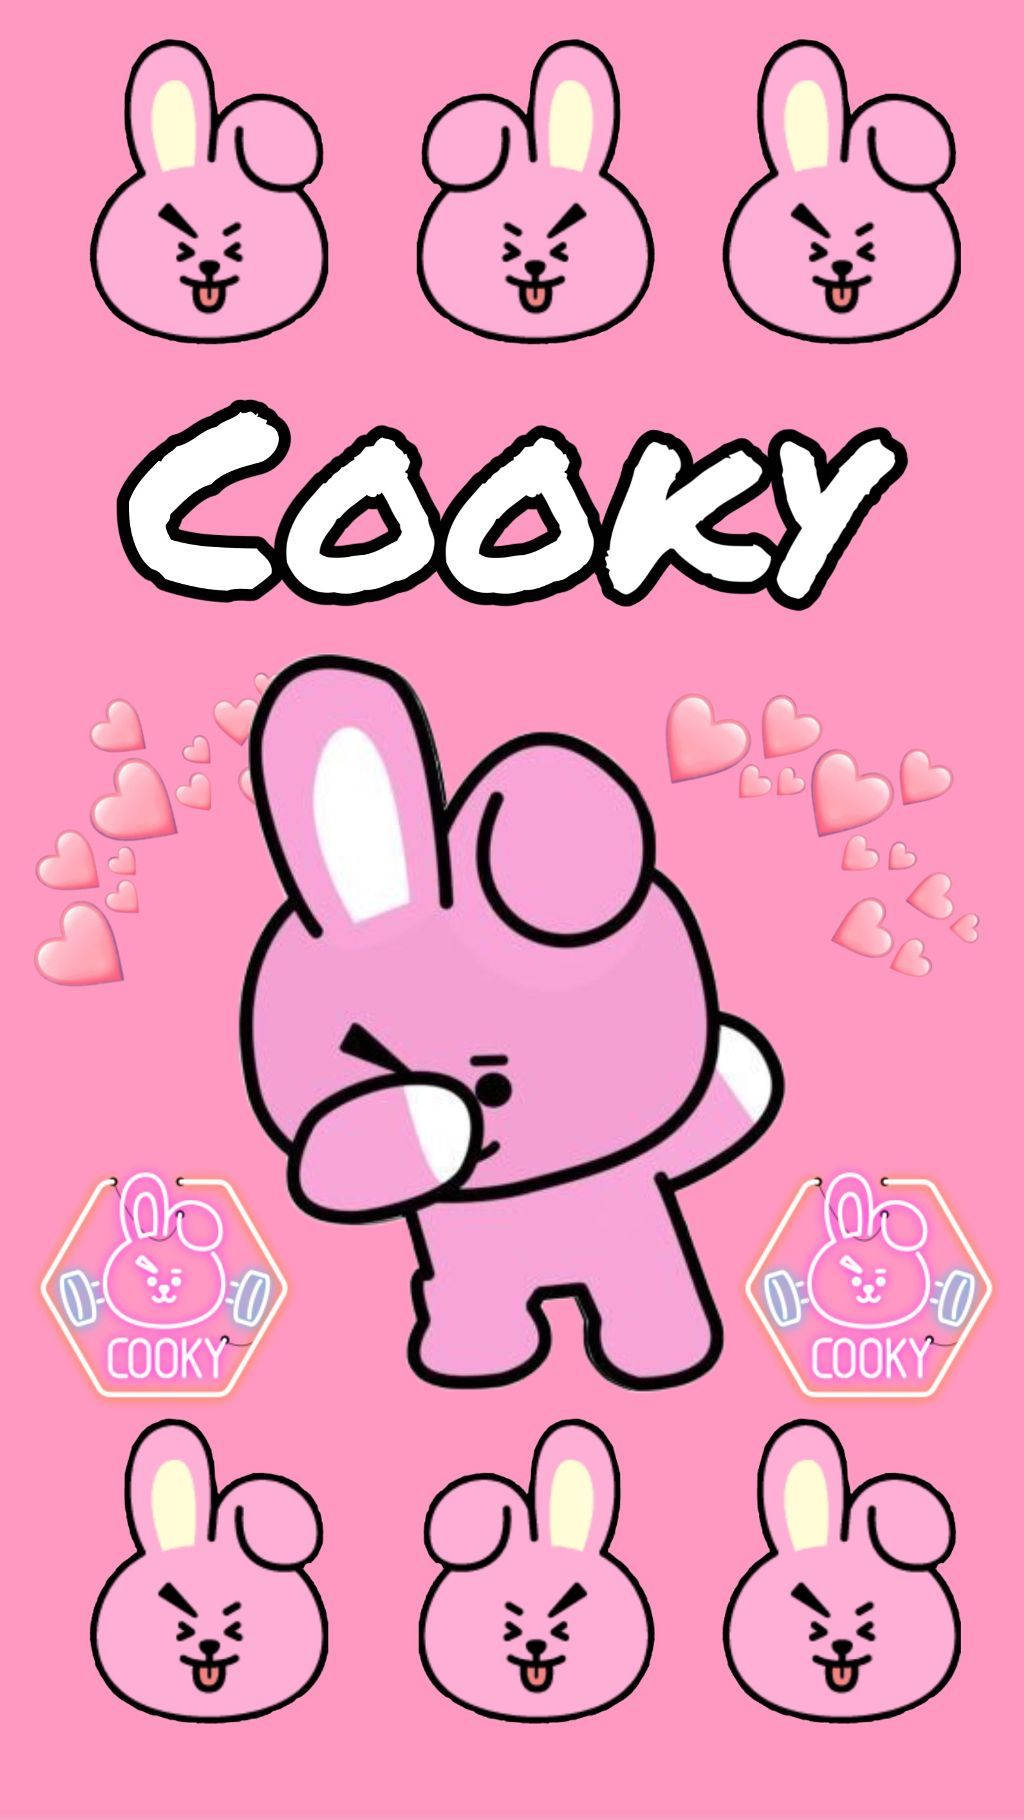 Download free Adorable Cooky Bt21 In A Dab Pose Wallpaper - MrWallpaper.com